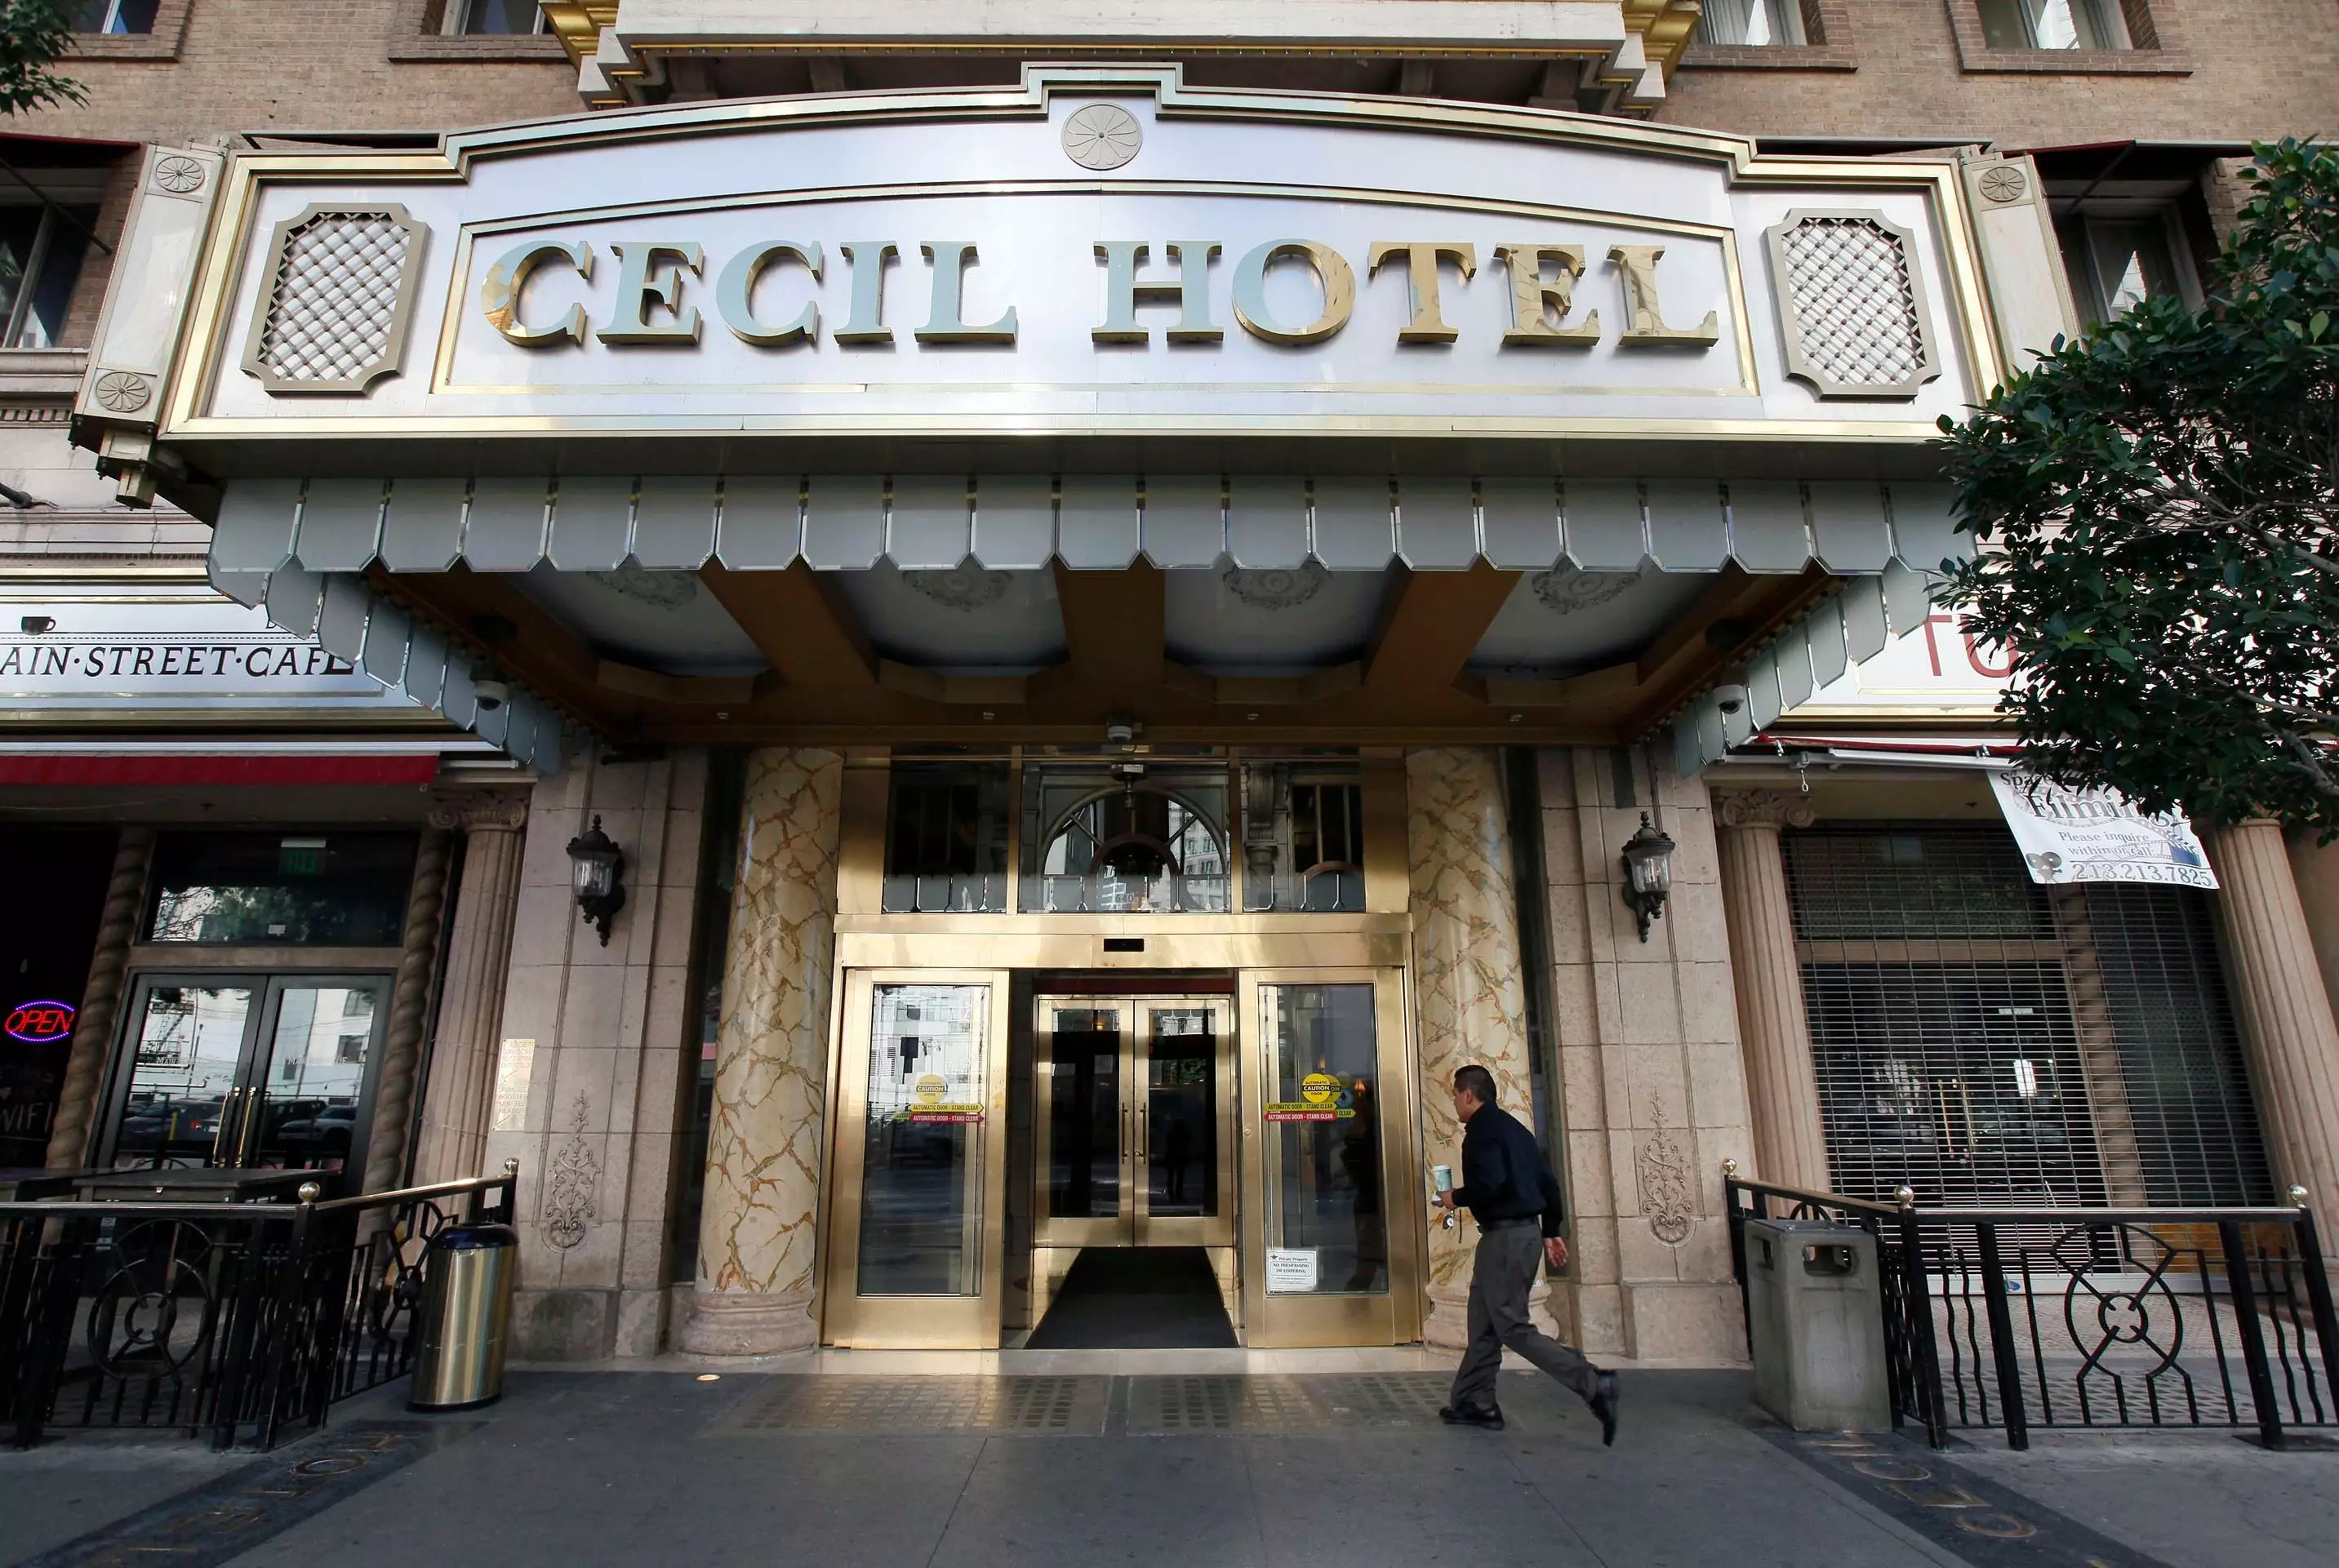 Horror at the Cecil Hotel is a three part series which takes a look at three different murder cases (